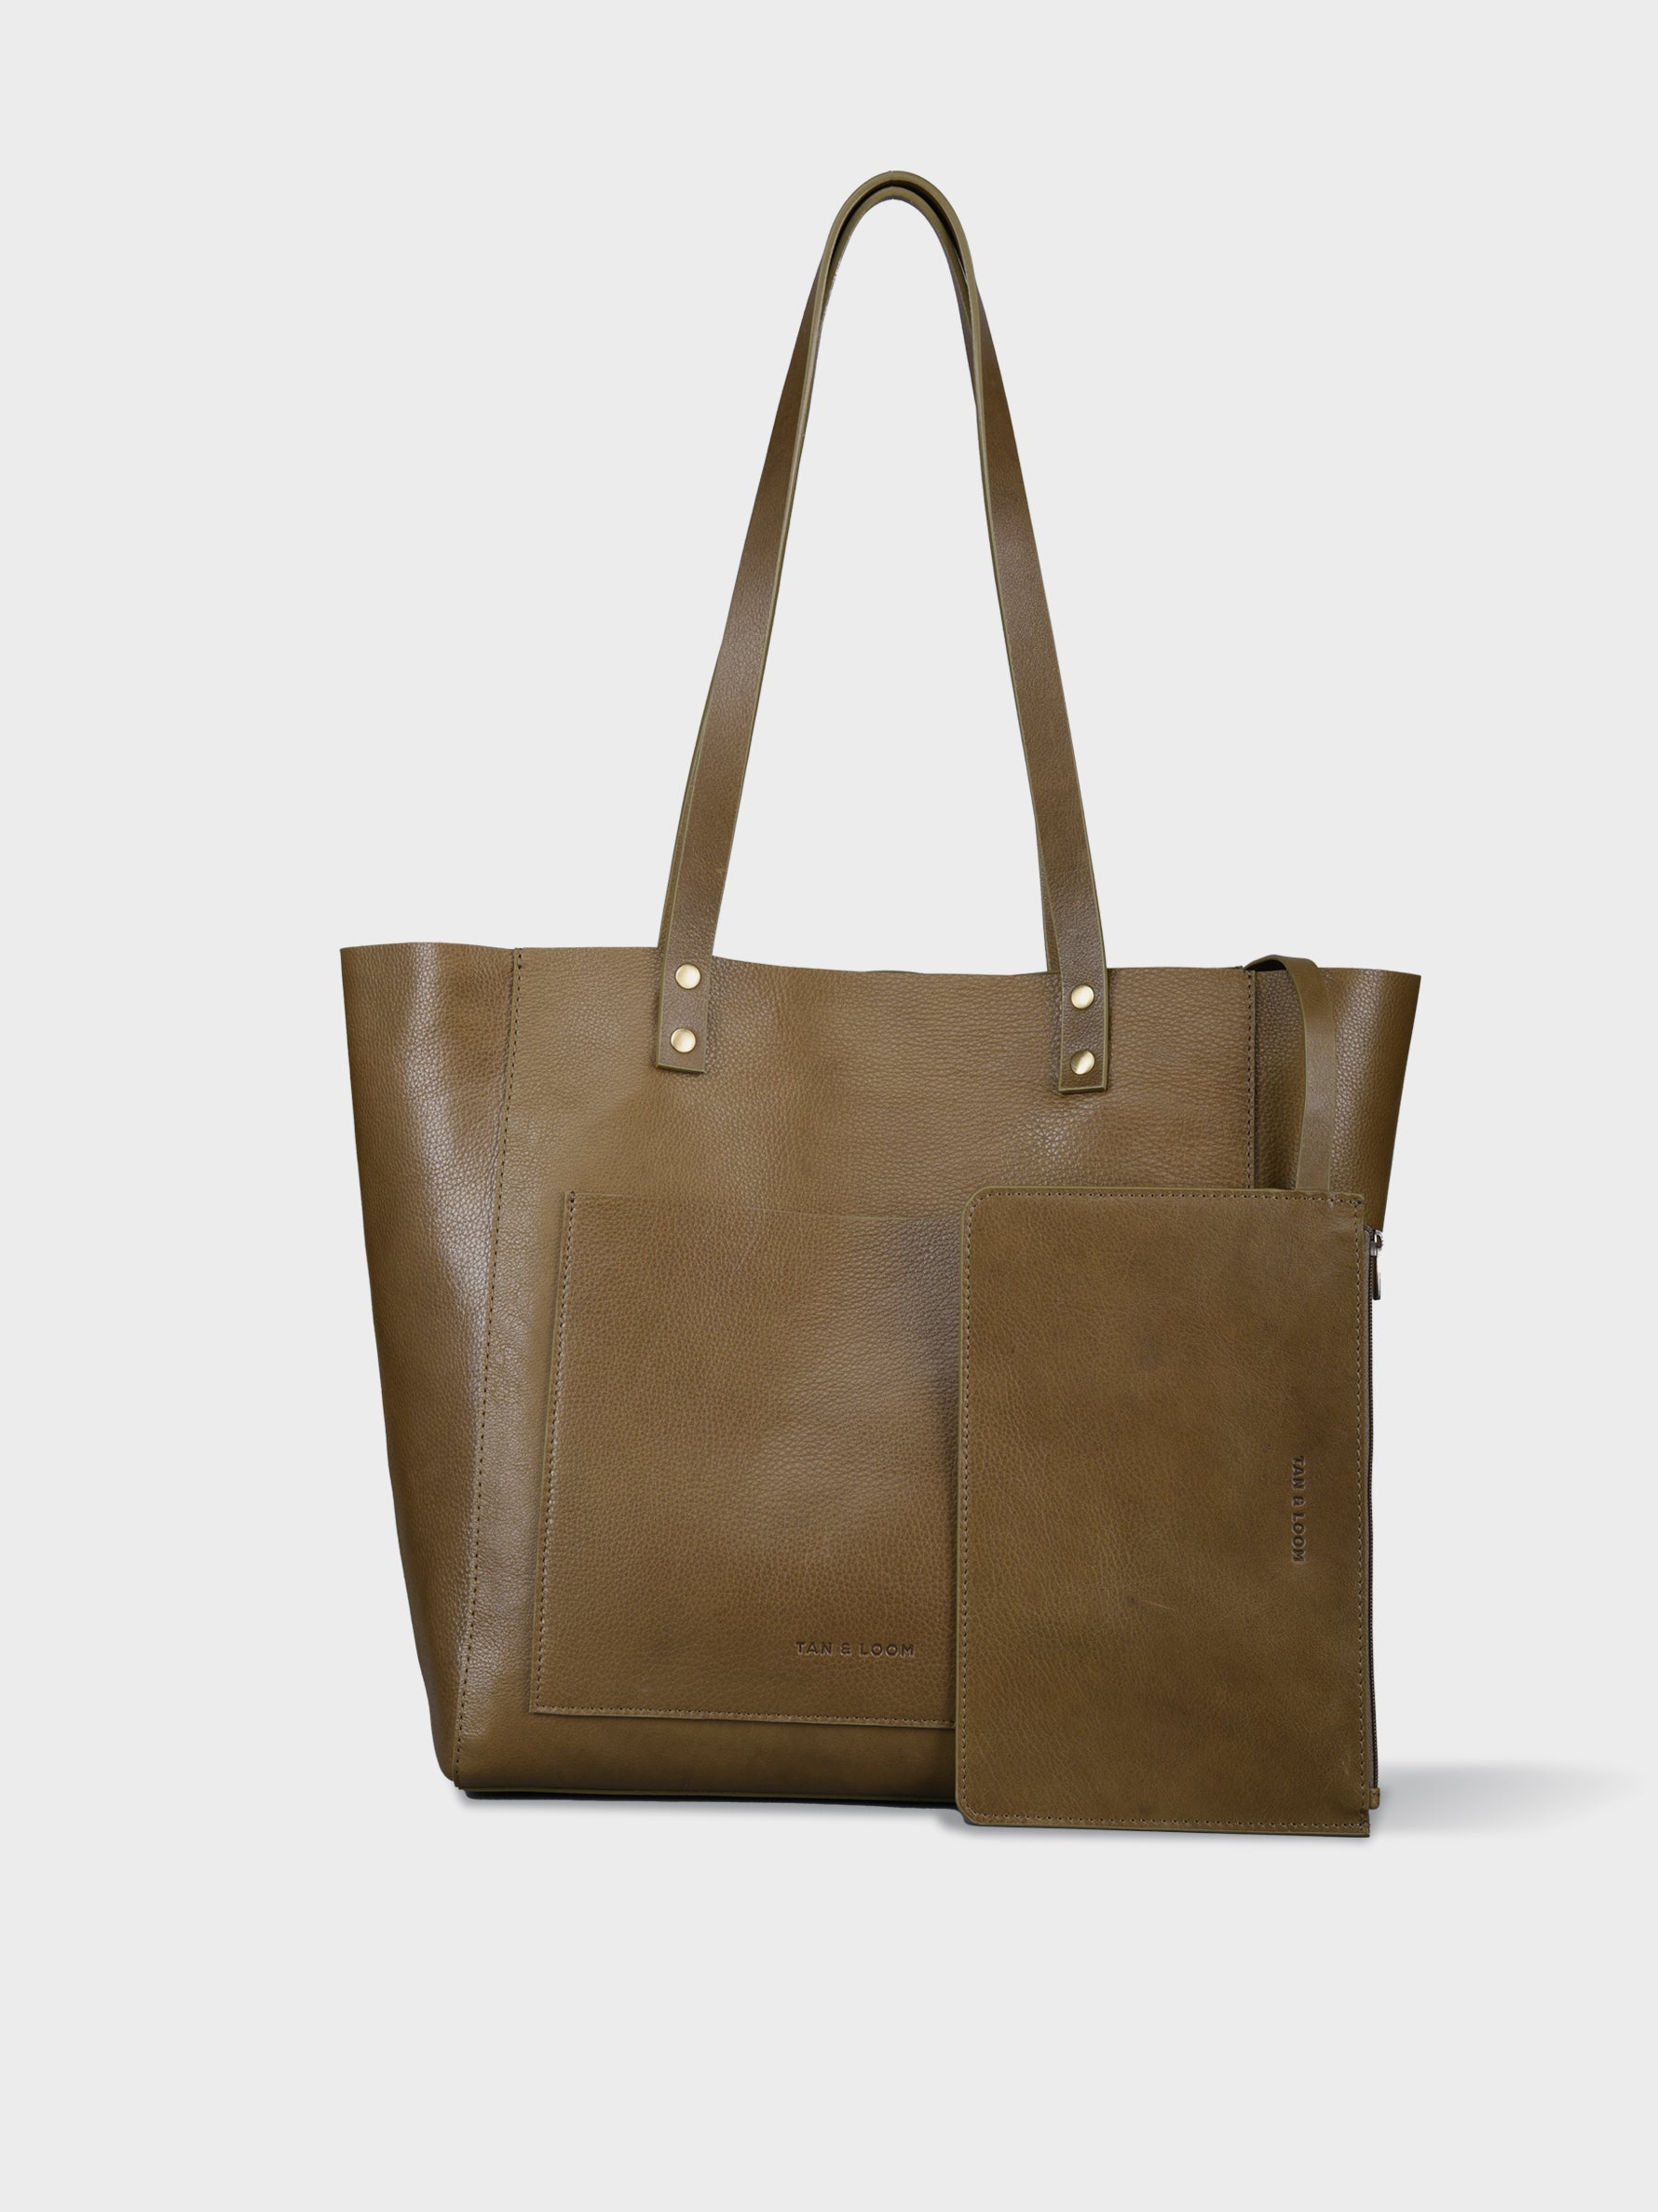 Handcrafted Genuine Vegetable Tanned Leather Old Fashioned Tote Regular Olive Green for Women Tan & Loom